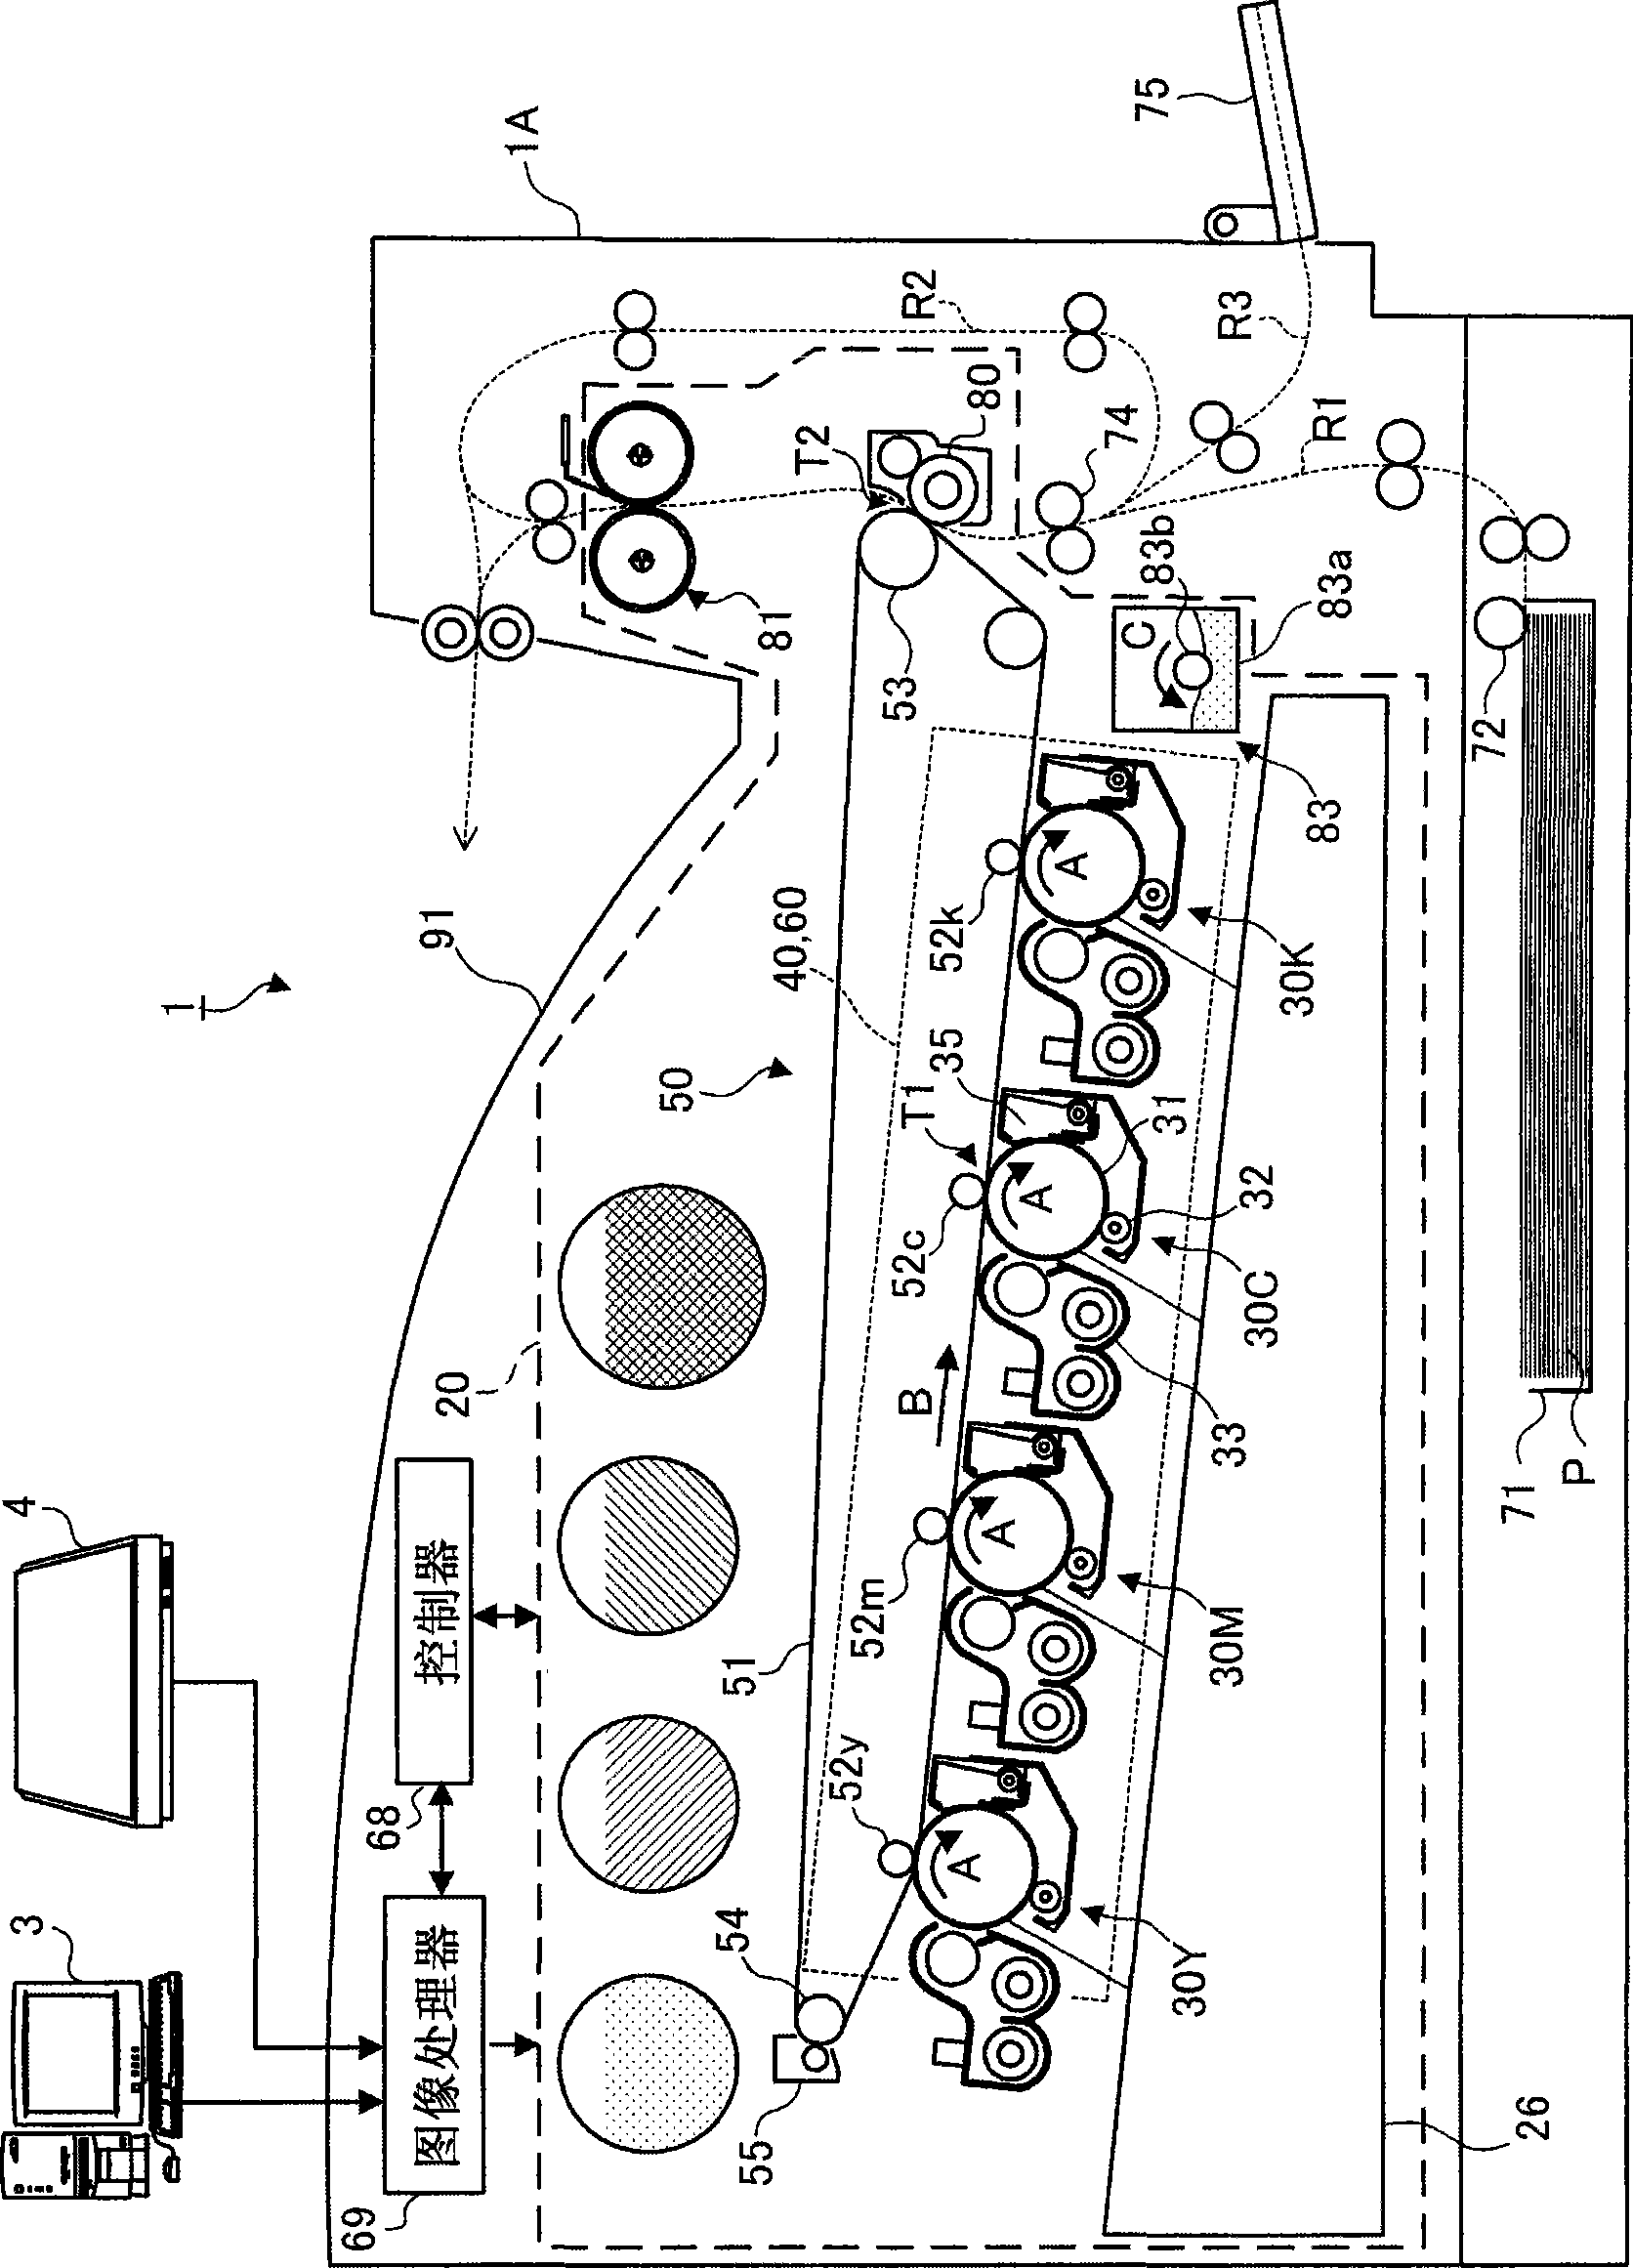 Image forming apparatus, and related methods